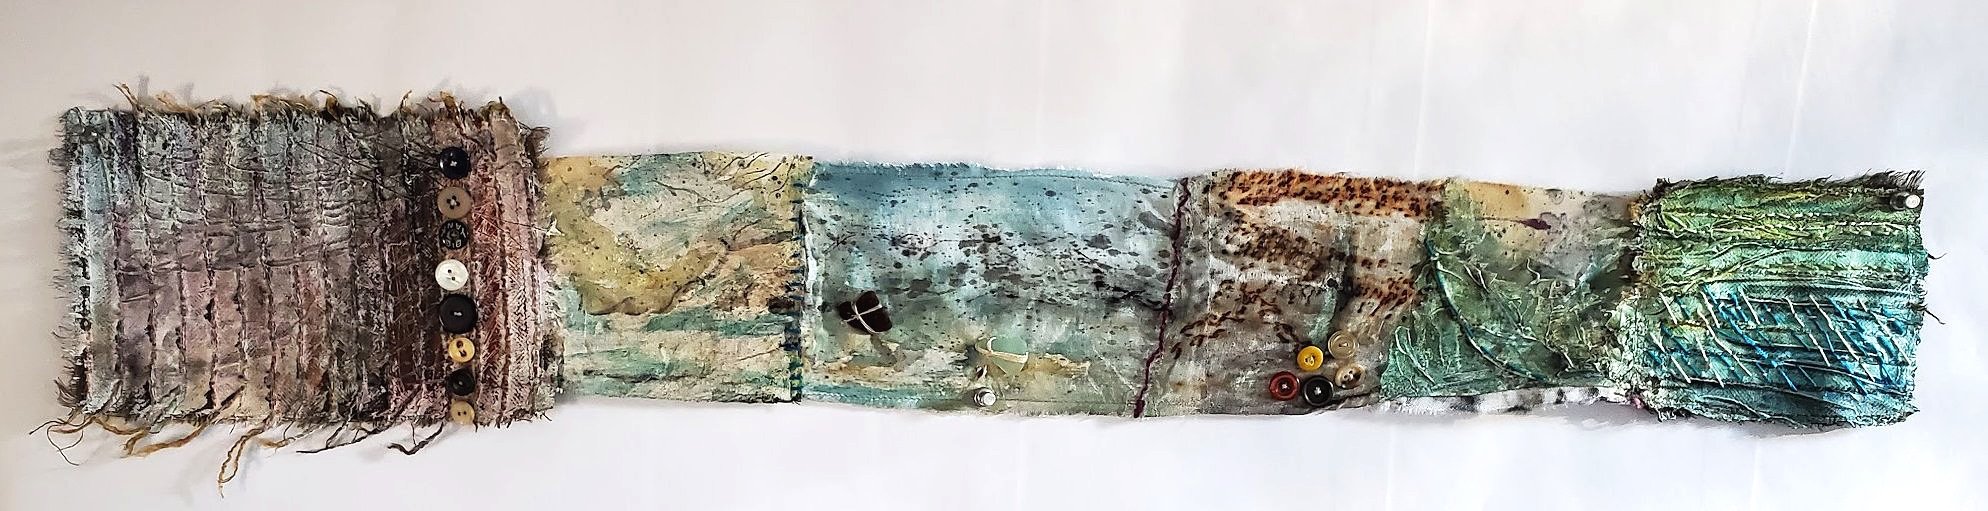 INFLUENCED BY NATURE'S MAGIC #4 ~ 6"x35" Recycled fabrics and mixed media layered with gesso, paints, ink, cold wax, stitching and found objects including birch bark, rope, rusty parts and rings..  